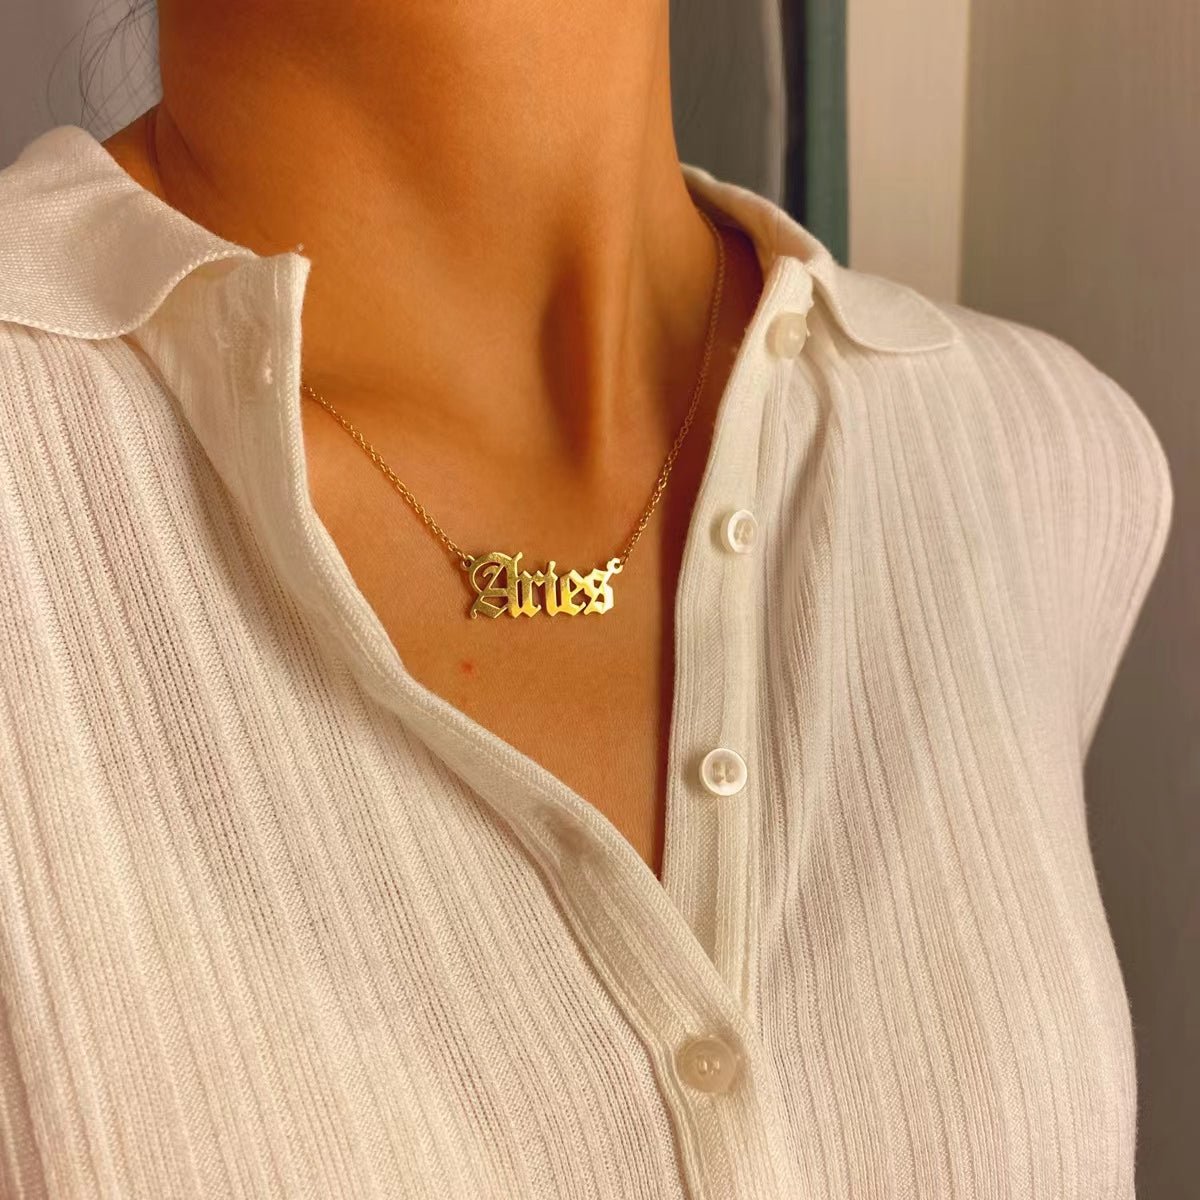 STAINLESS ZODIAC SIGN NECKLACE - STAY FANCY